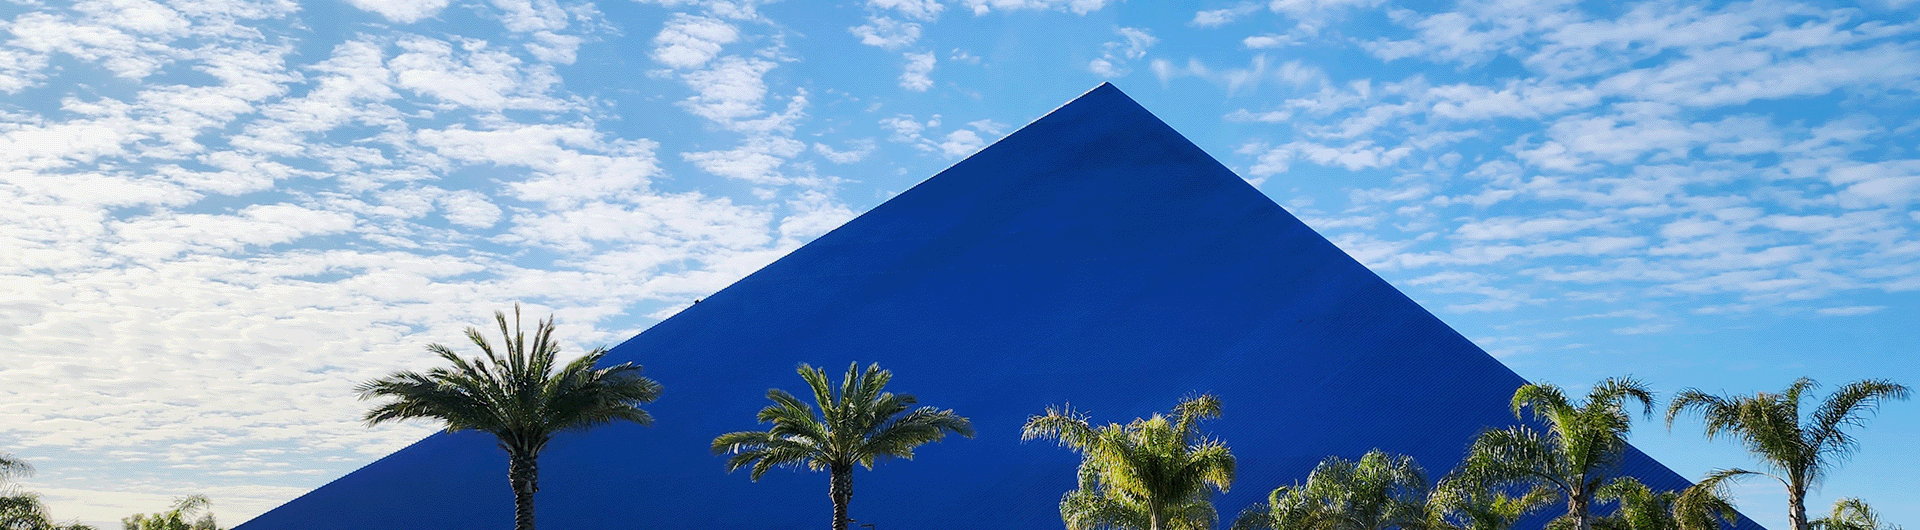 CSULB pyramid with clouds